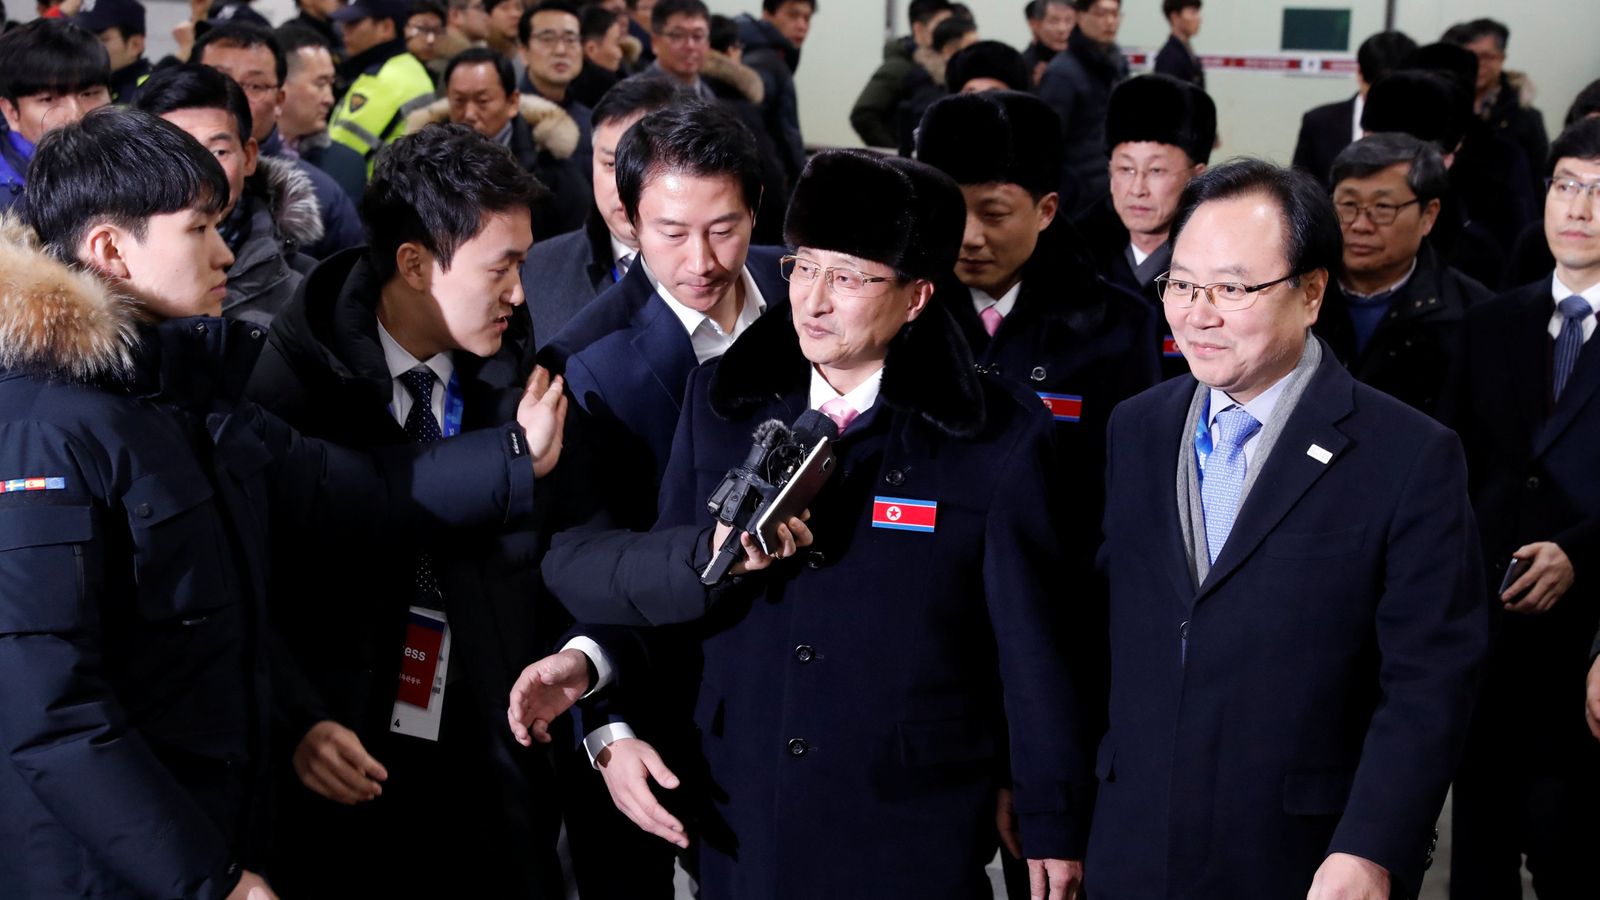 North Korean athletes arrive in South Korea for Winter Olympics | World ...